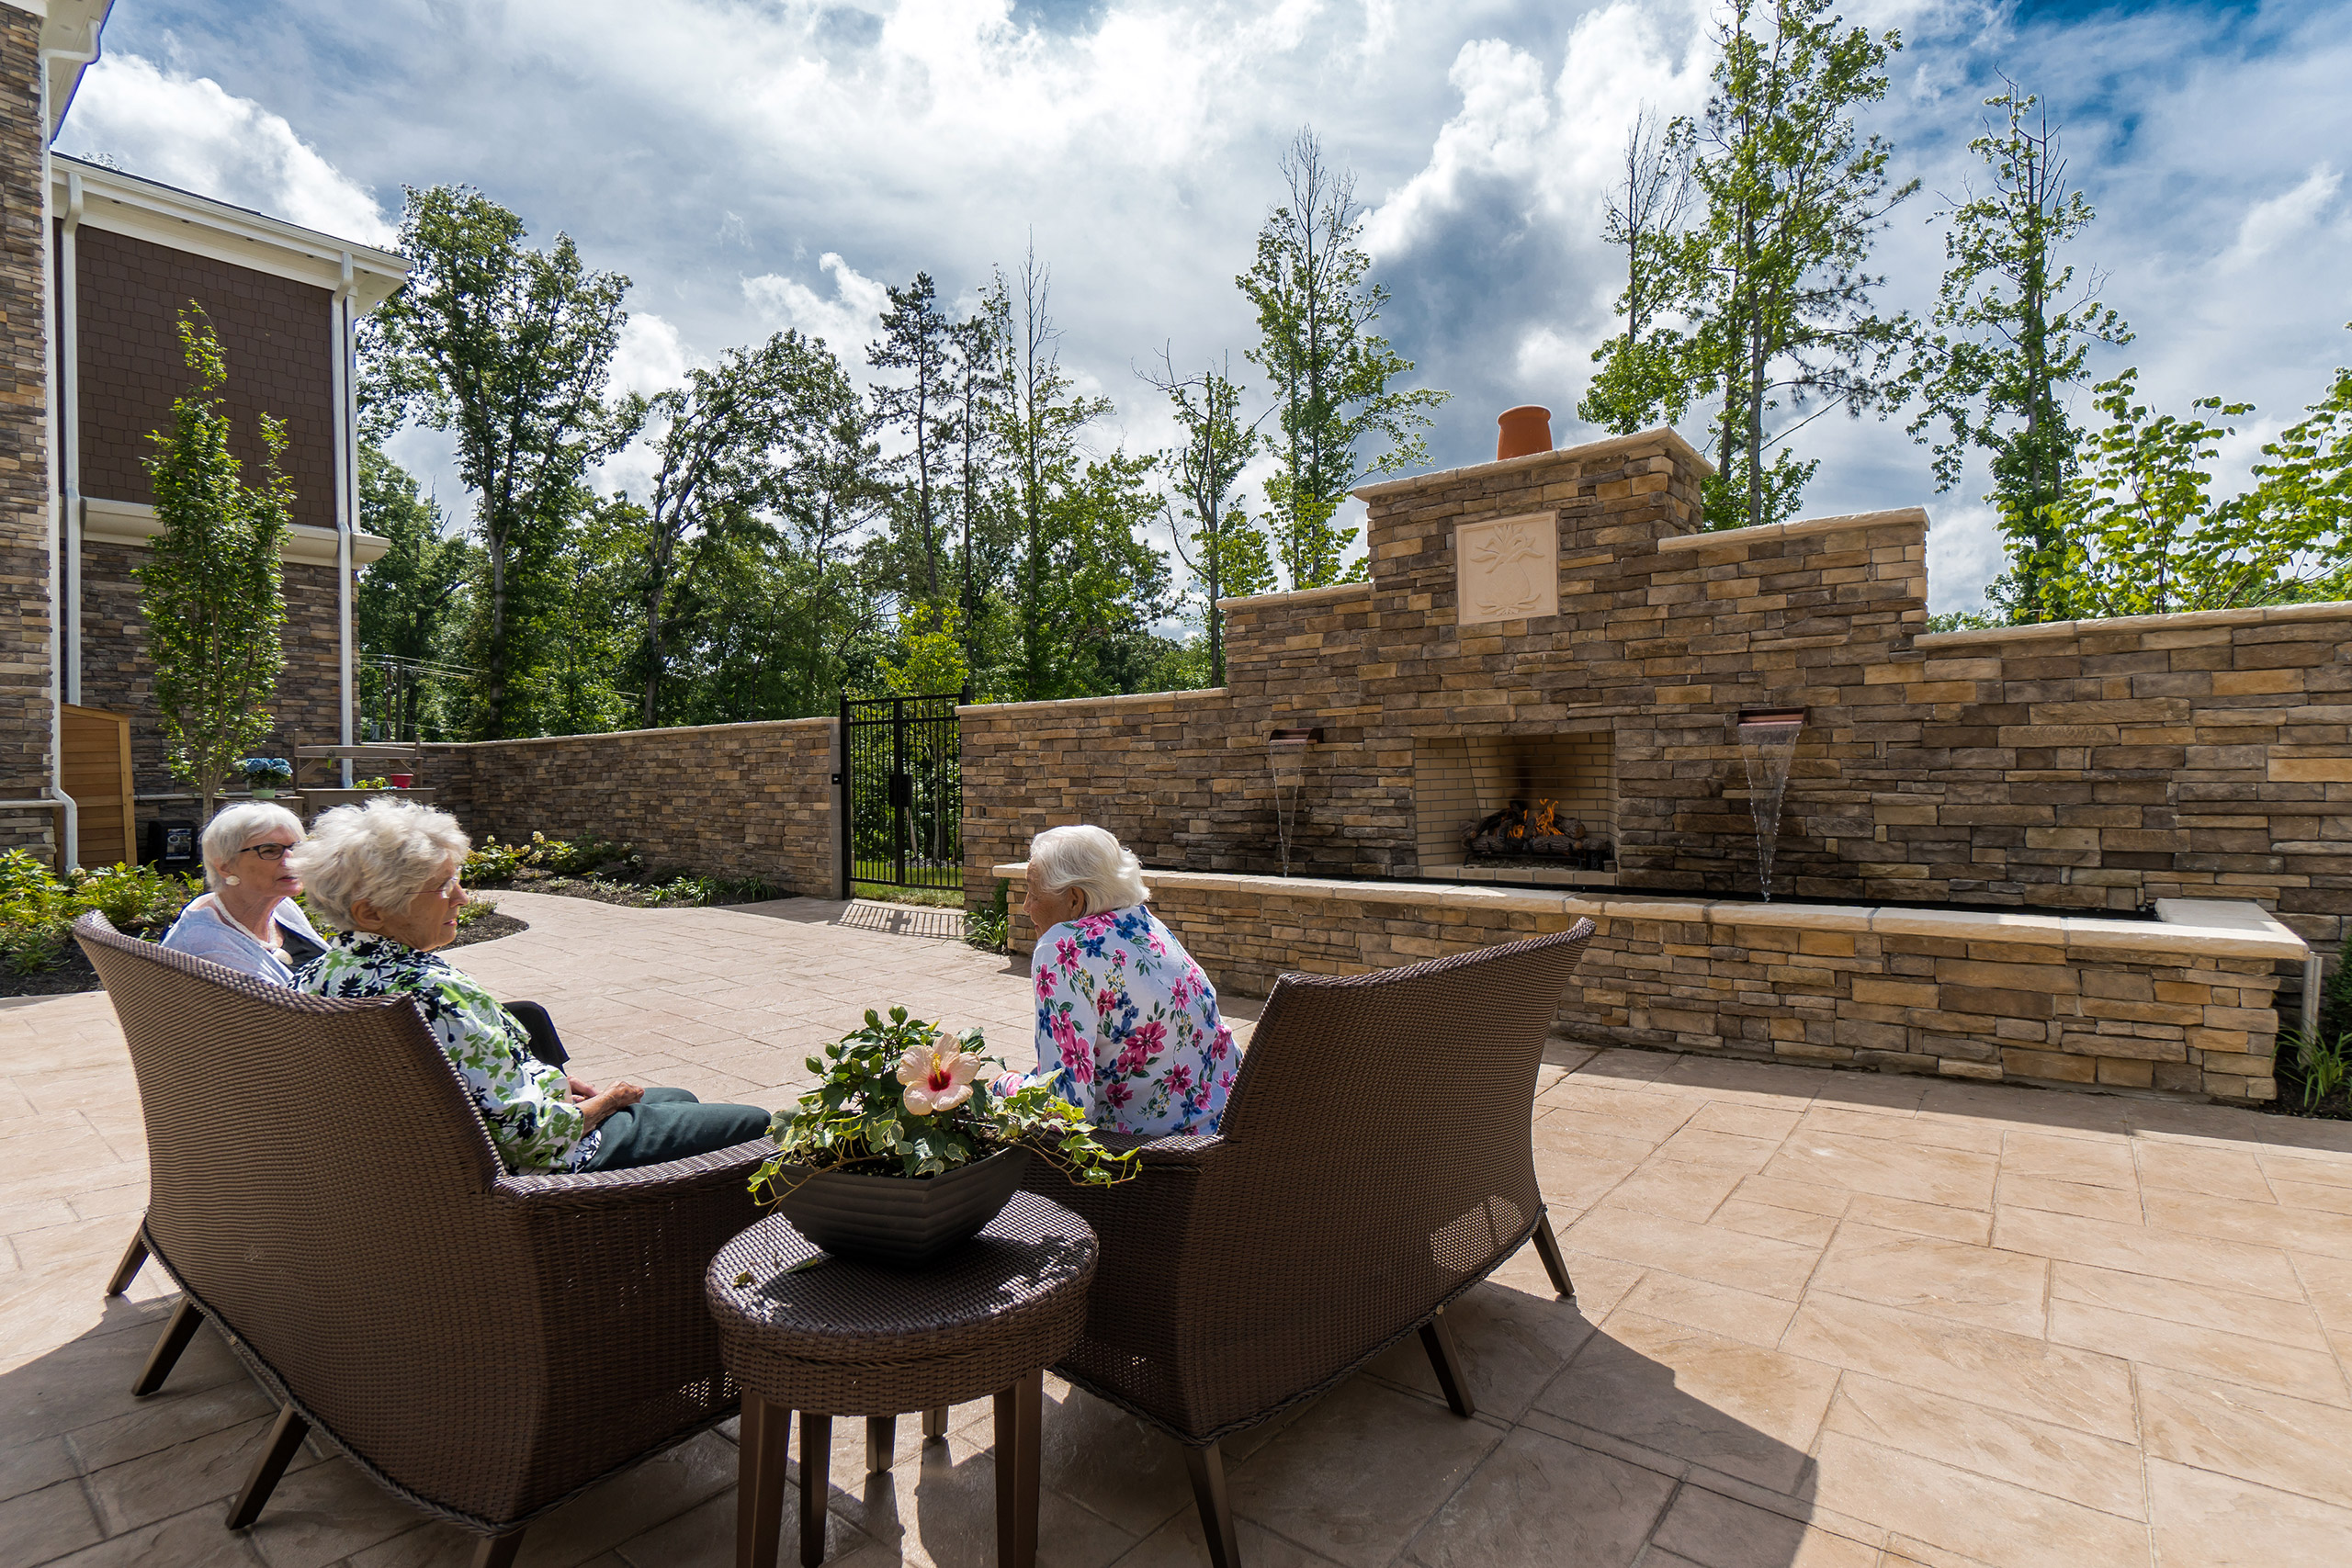 Residents enjoy the outdoor courtyard in Richmond